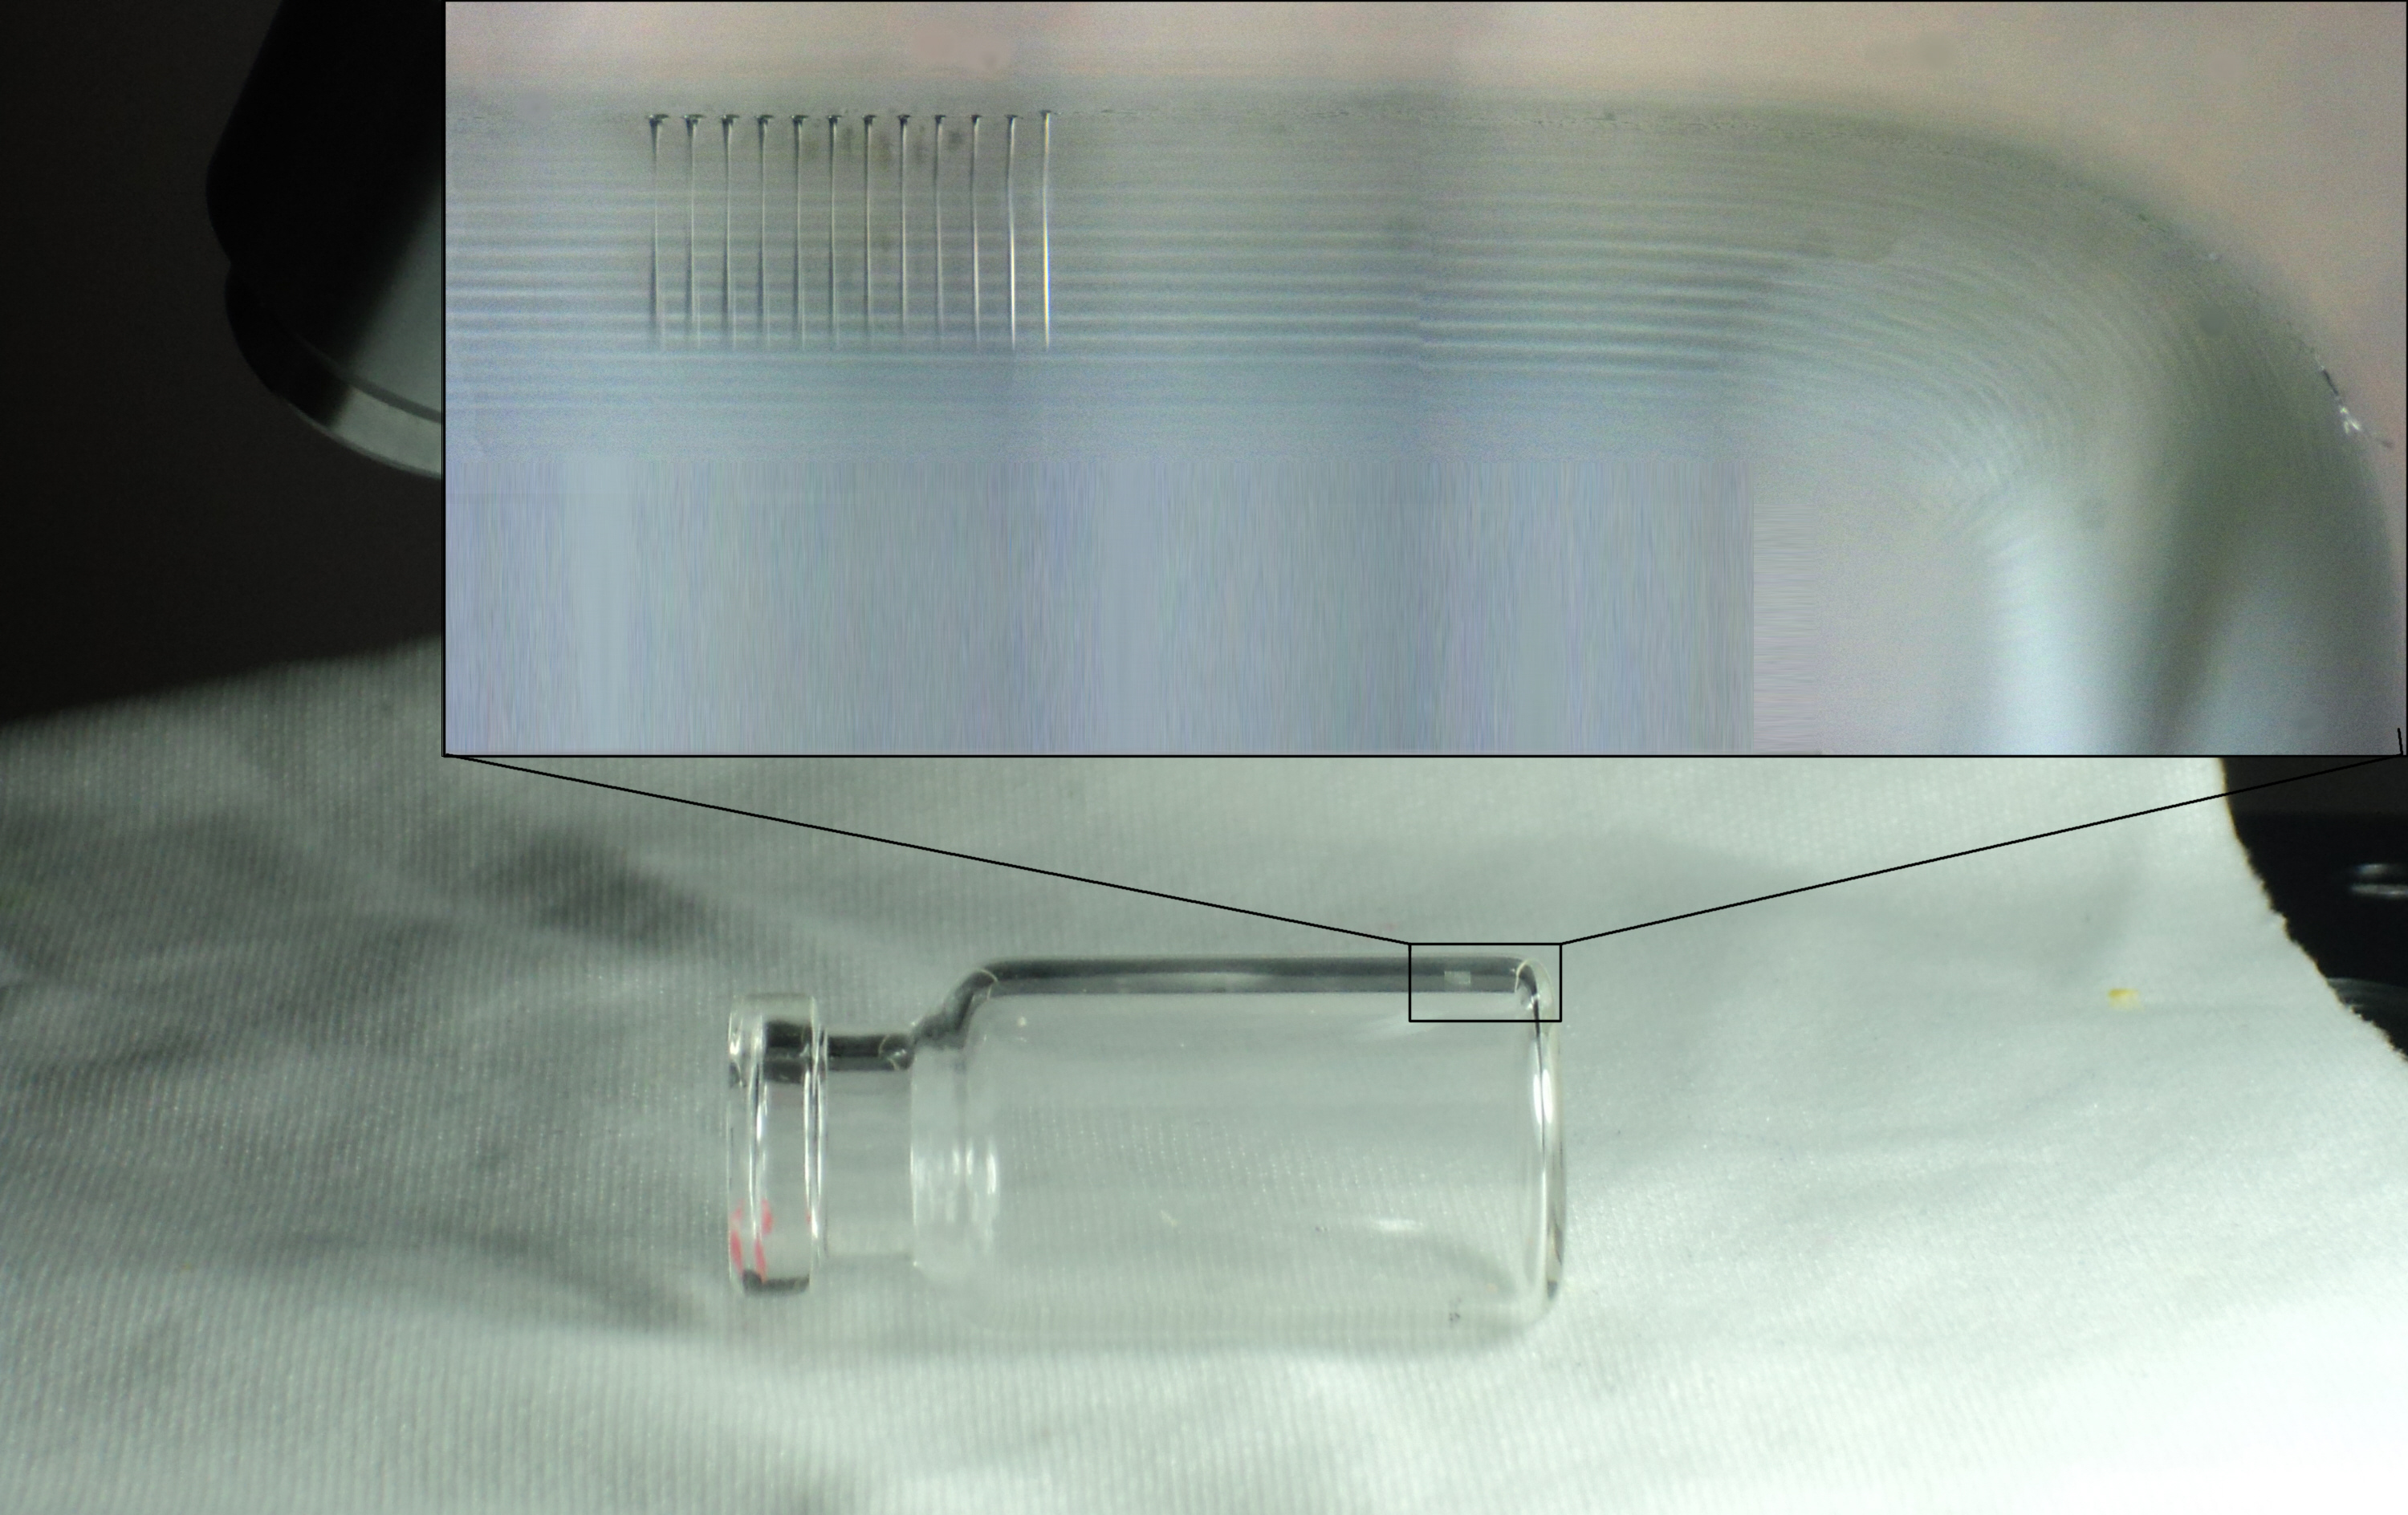 High-aspect ratio holes drilled in glass vial.